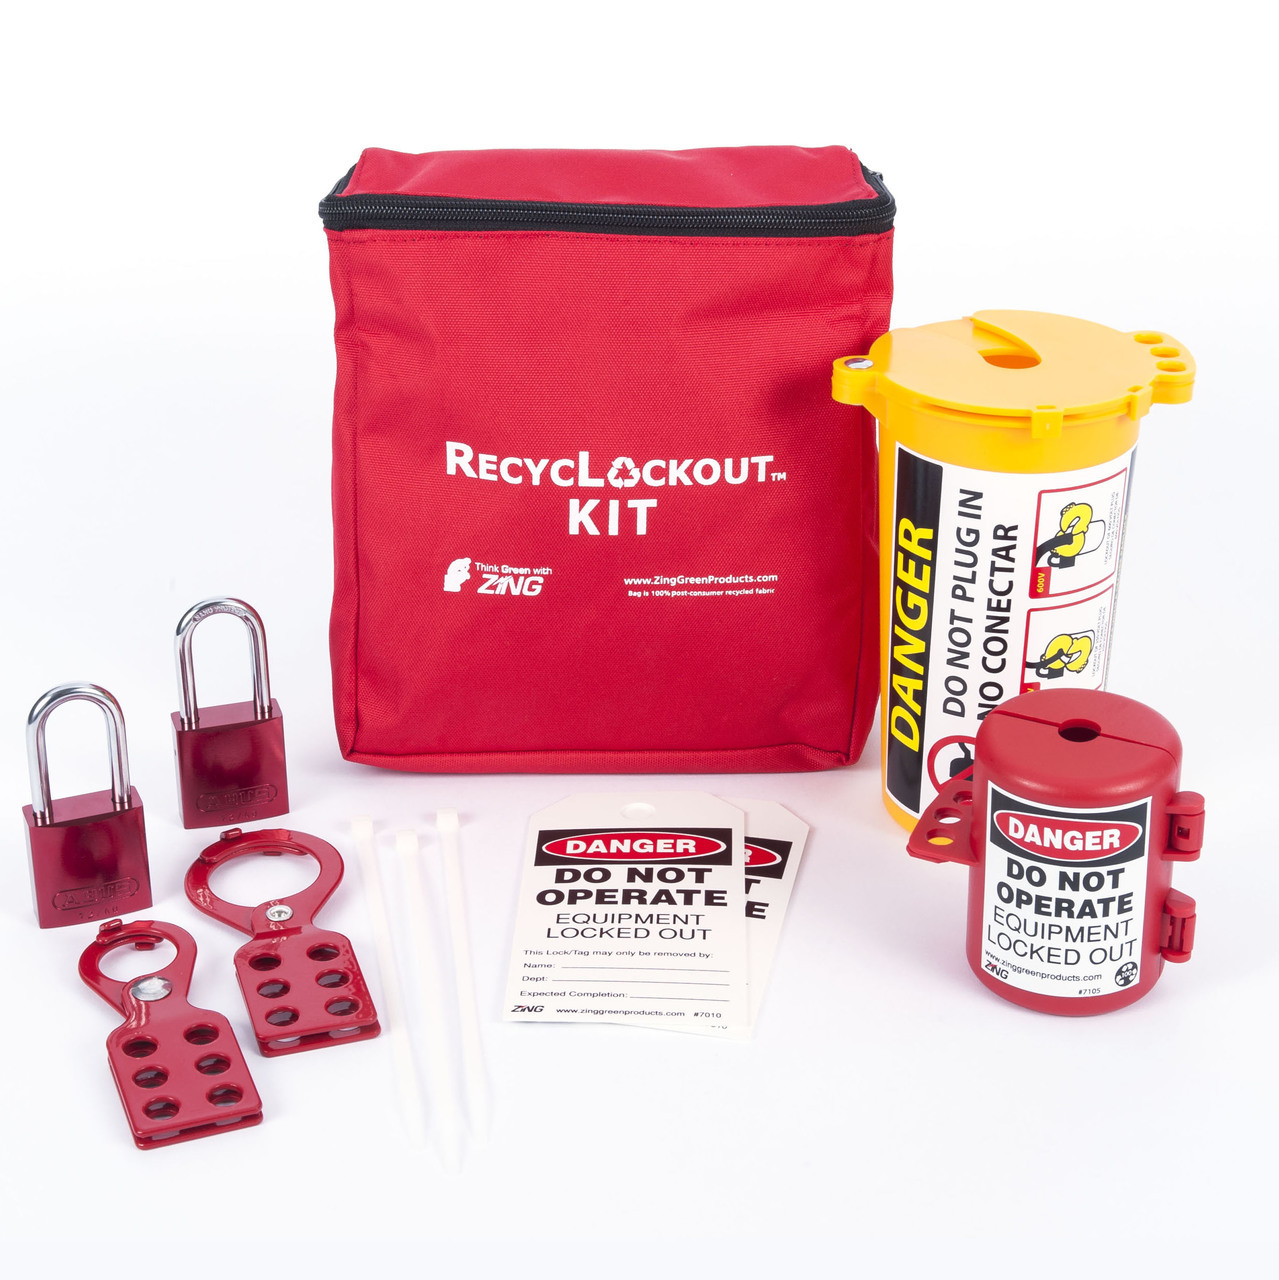 ZING RecycLockout Lockout Tagout Kit with Aluminum Padlocks, 11 Component, Plug Lockout